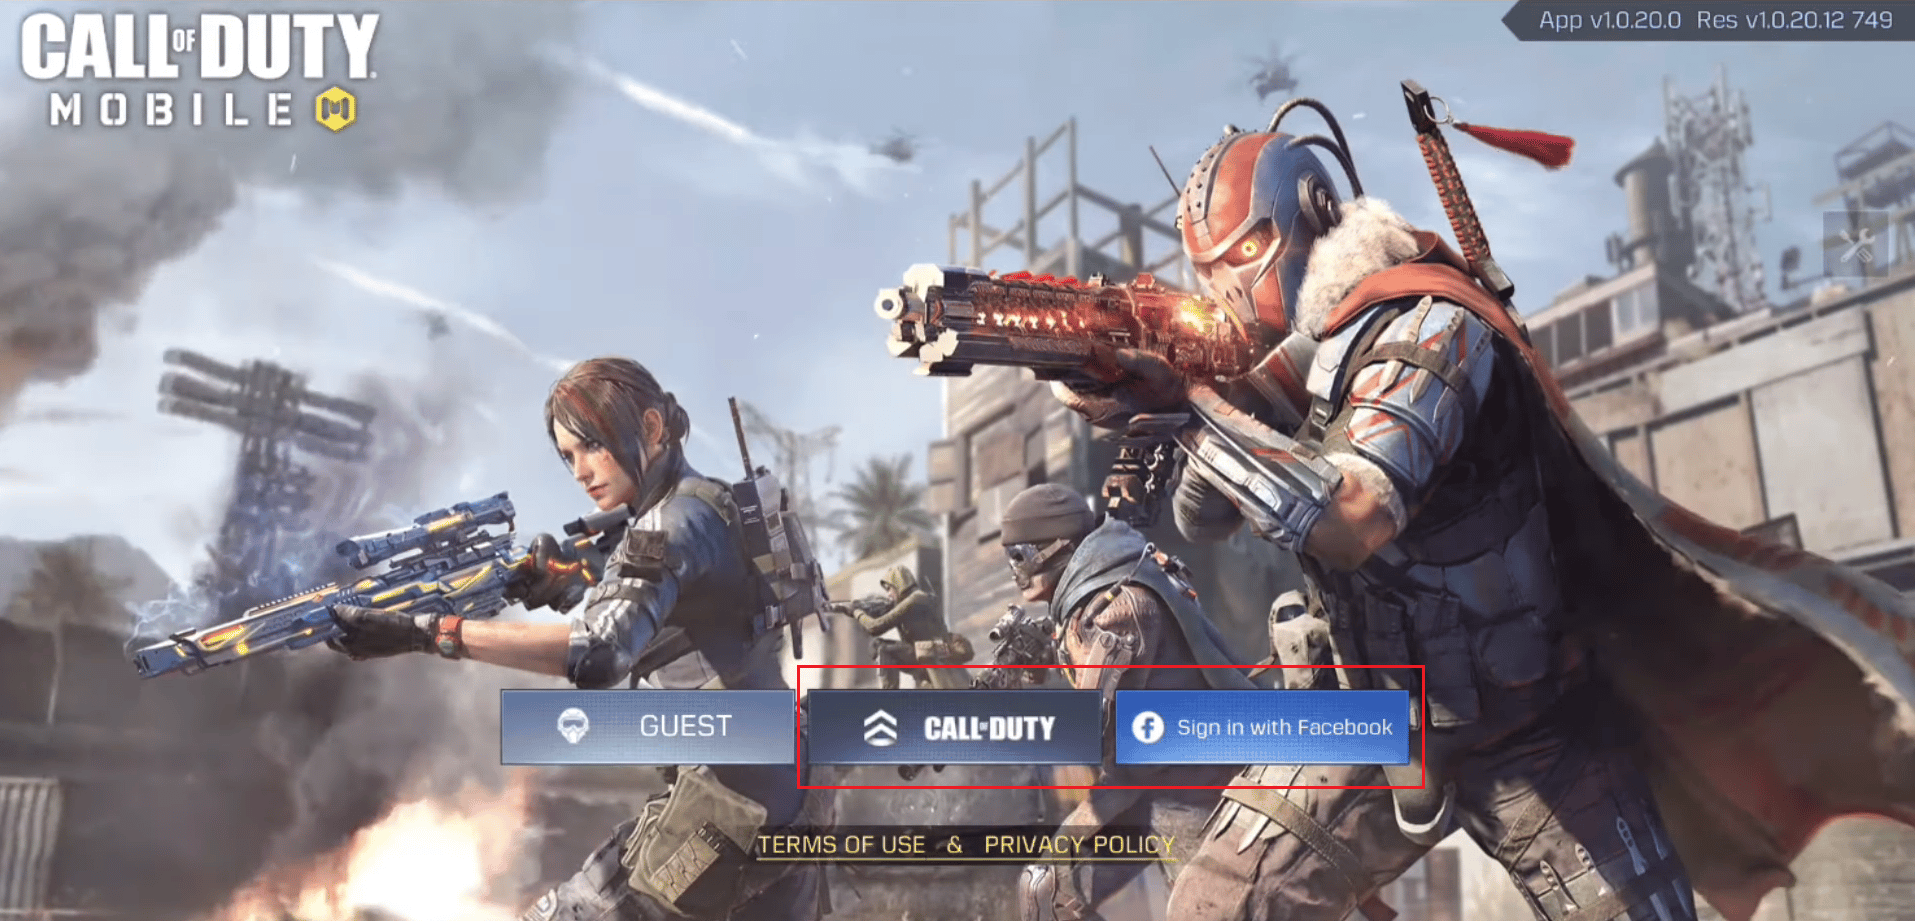 CALL OF DUTY to sign in with desired Activision account OR Sign in with Facebook | How to Unlink Facebook from Call of Duty Mobile